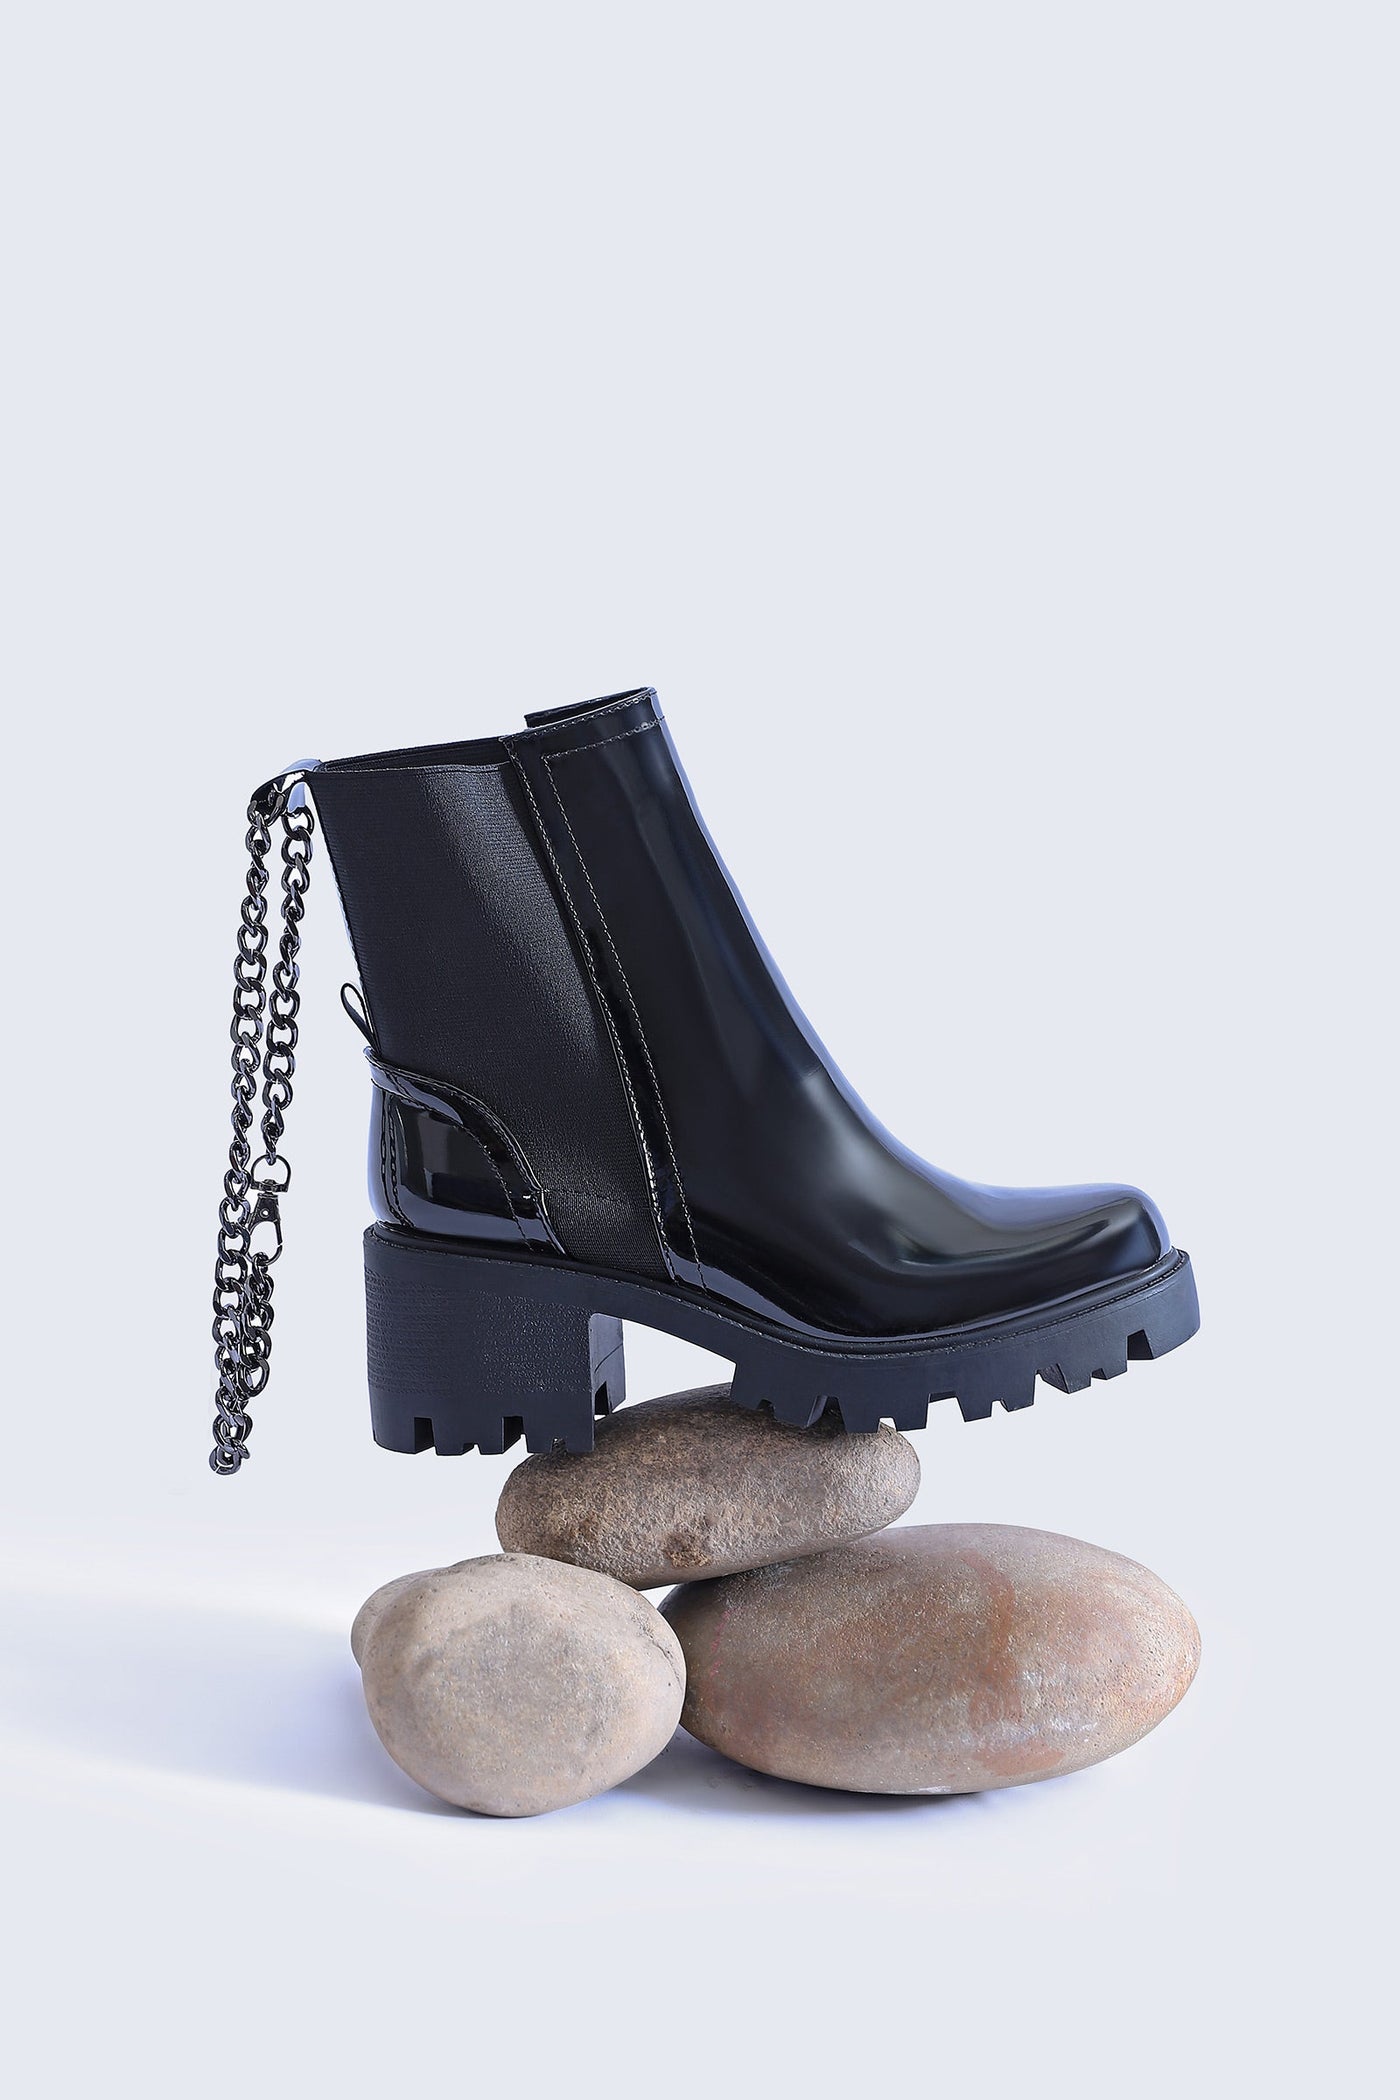 Long Patent Chain Boots